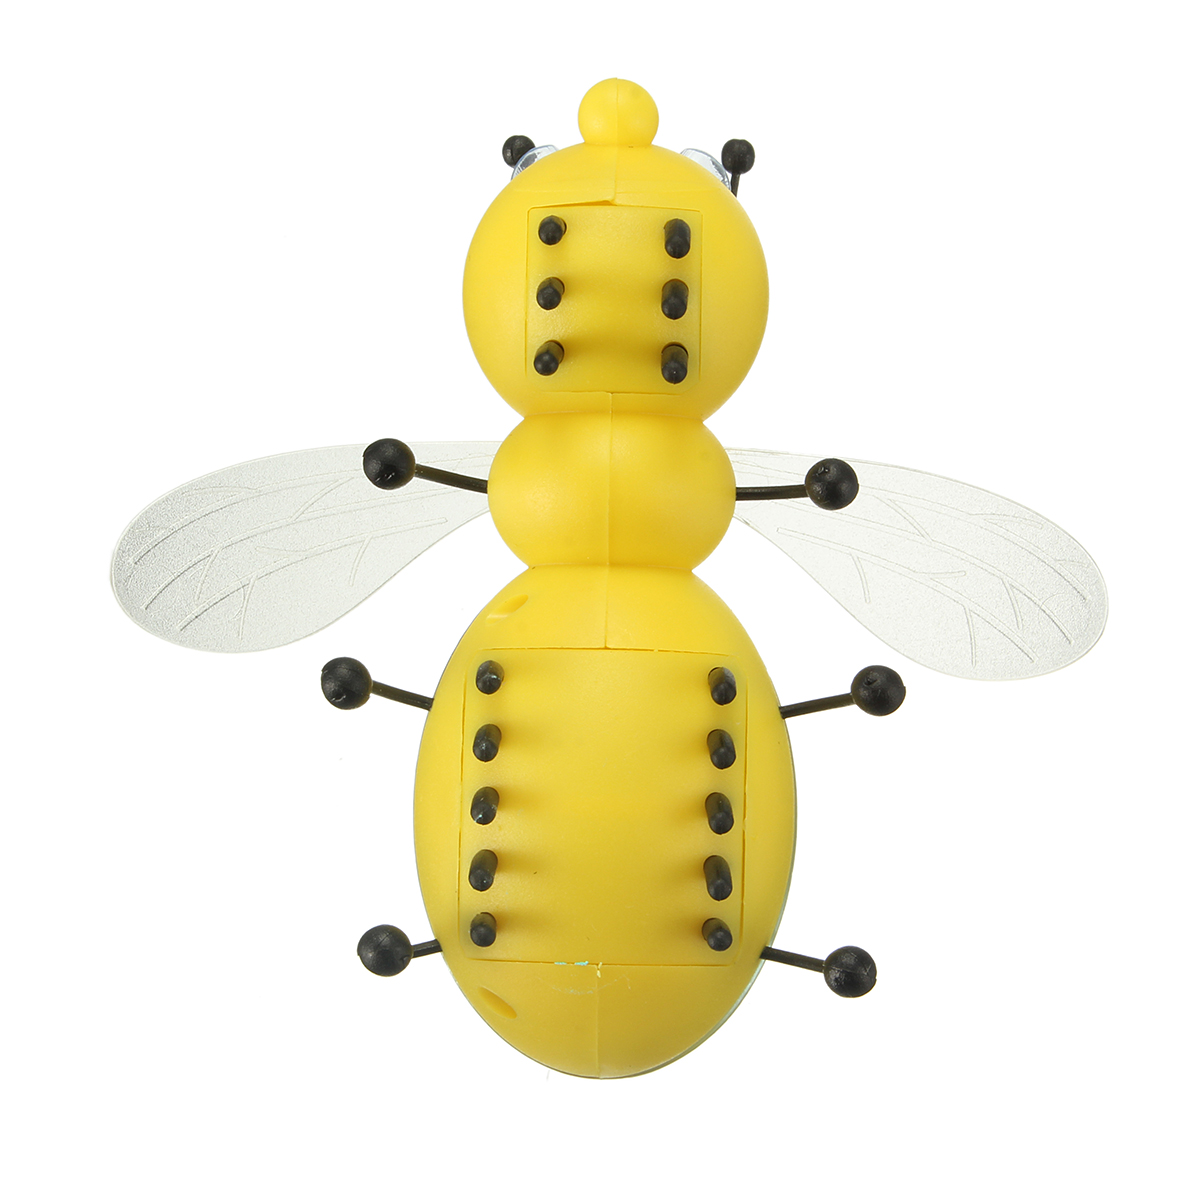 Educational-Solar-Powered-Bee-Ant-Robot-Toy-Gadget-Gift-1965213-7